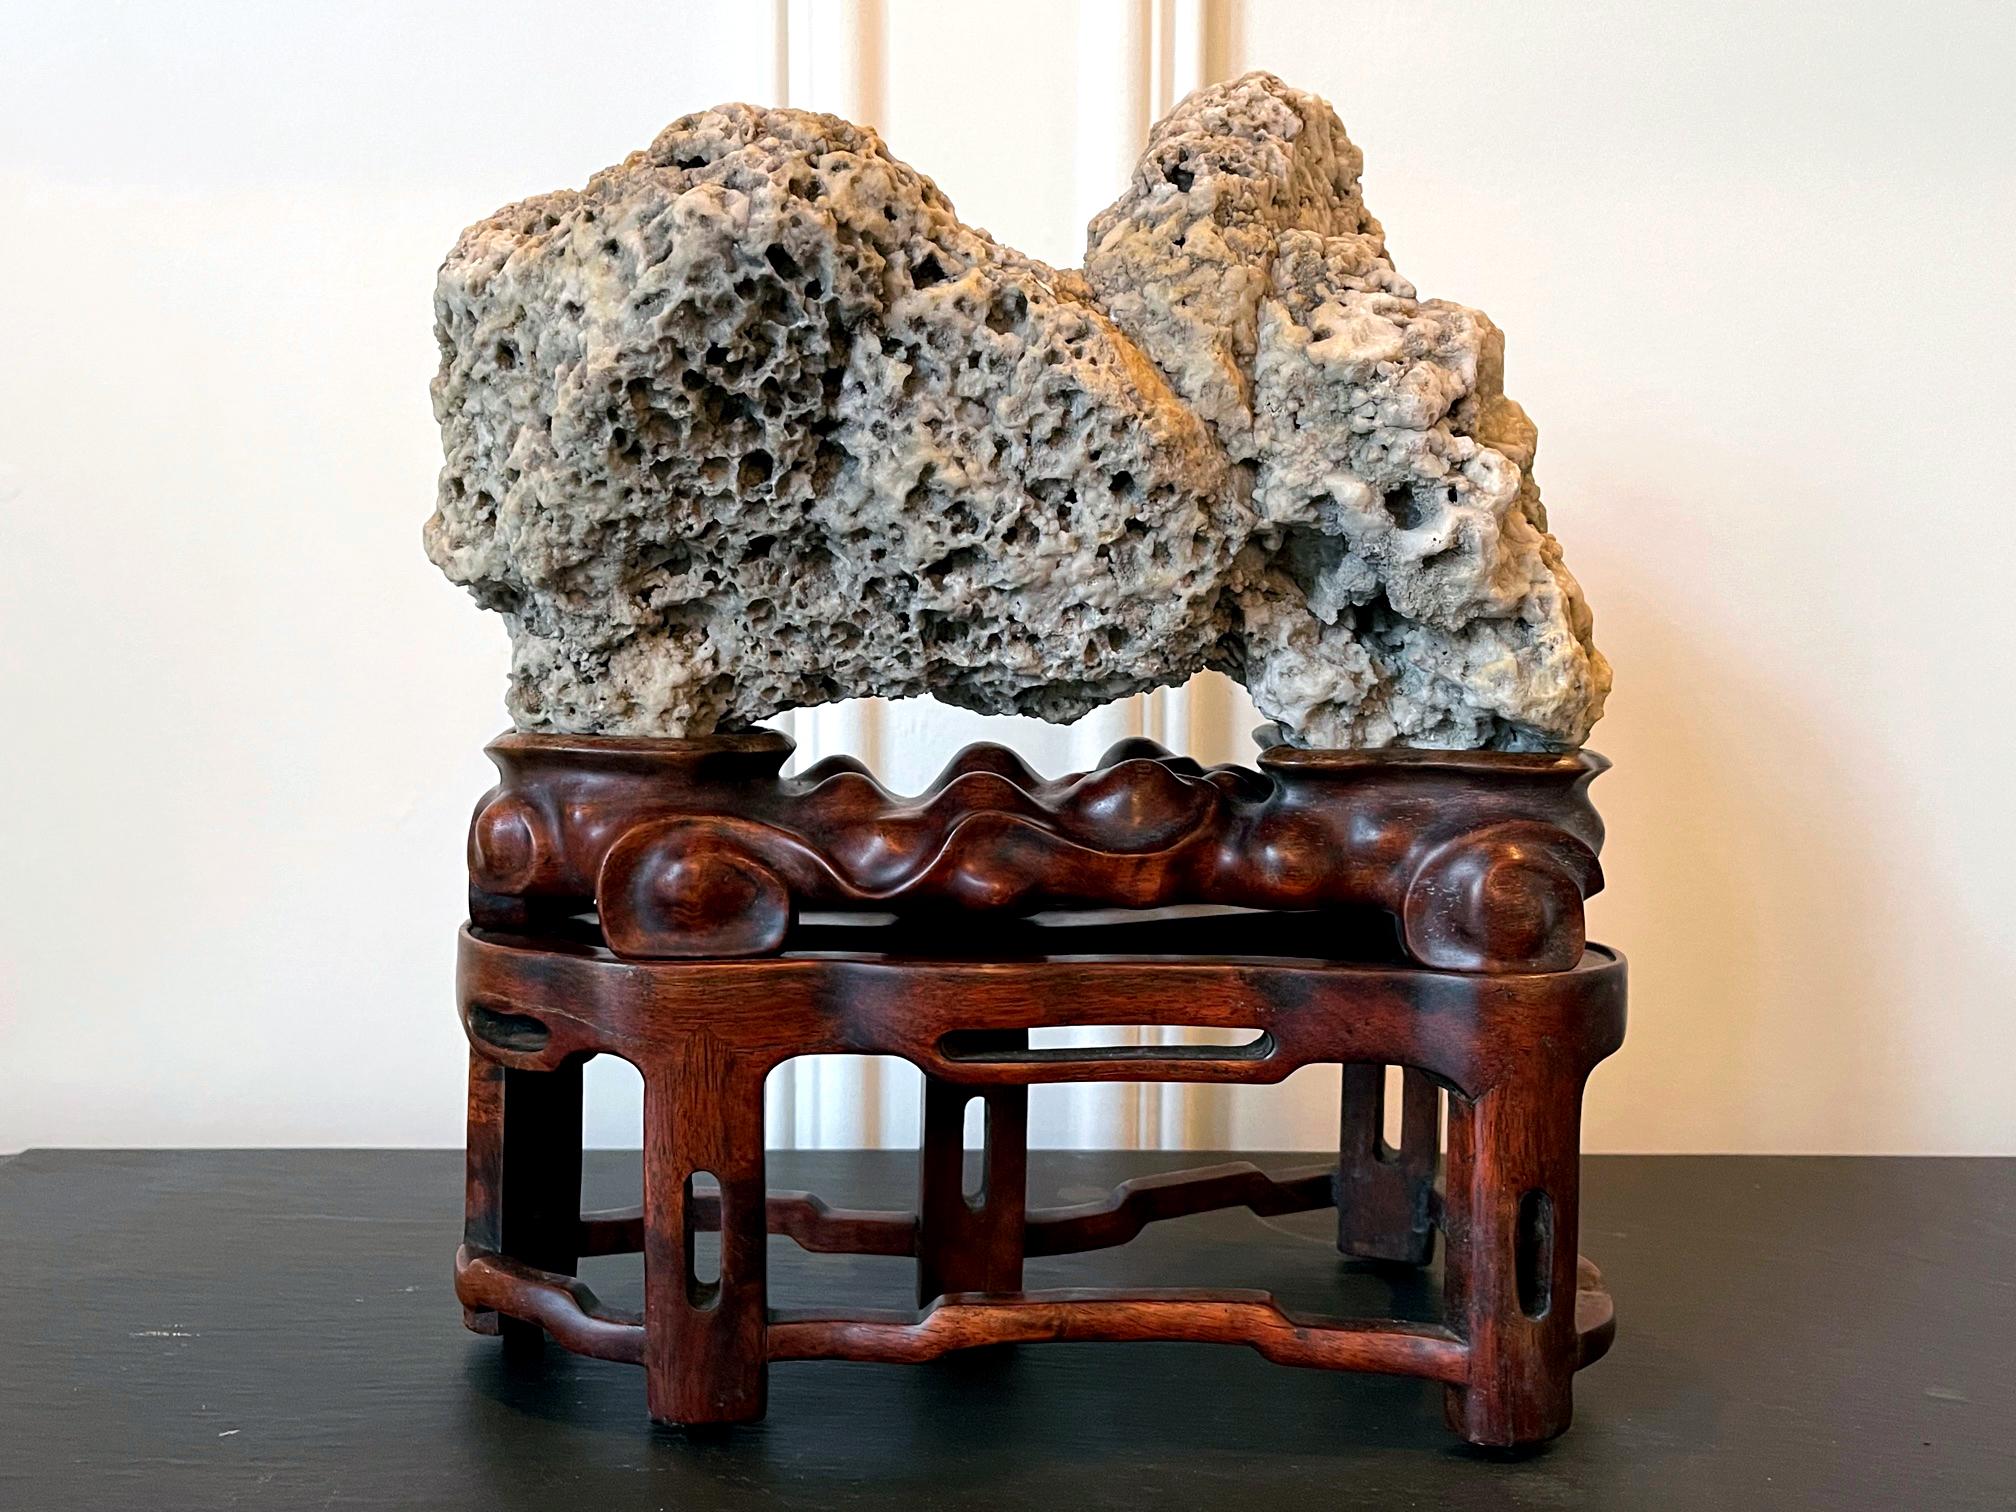 This sublime Chinese scholar stone was collected from the Jade Peaks in the Kun Mountains, Jiangsu Province. Known sometimes as 